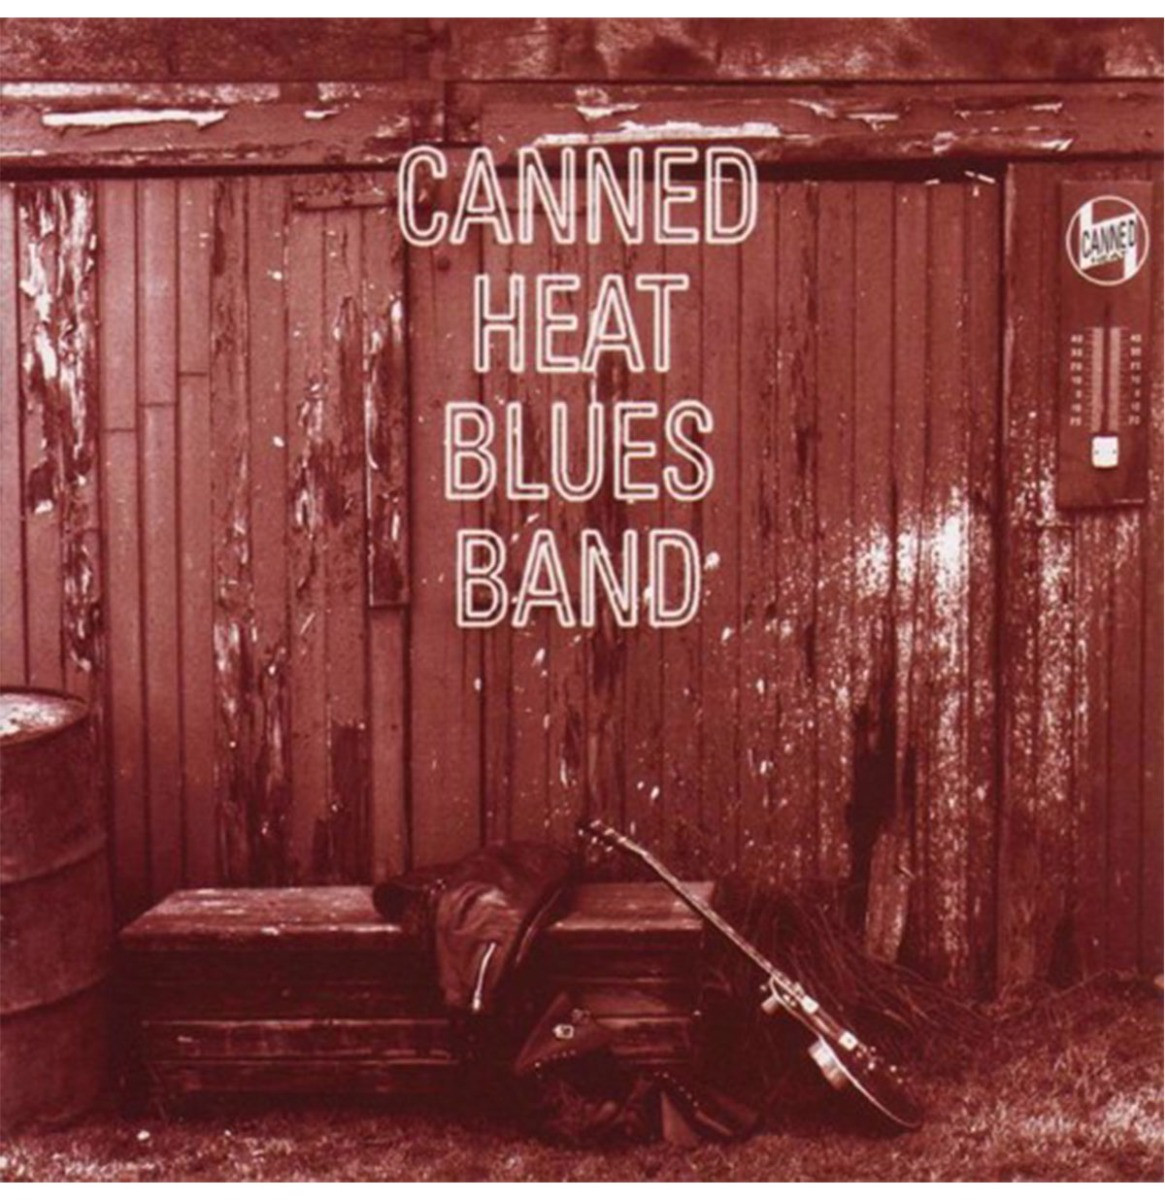 Canned Heat - Canned Heat Blues Band (Goud Vinyl) (Record Store Day 2021) LP